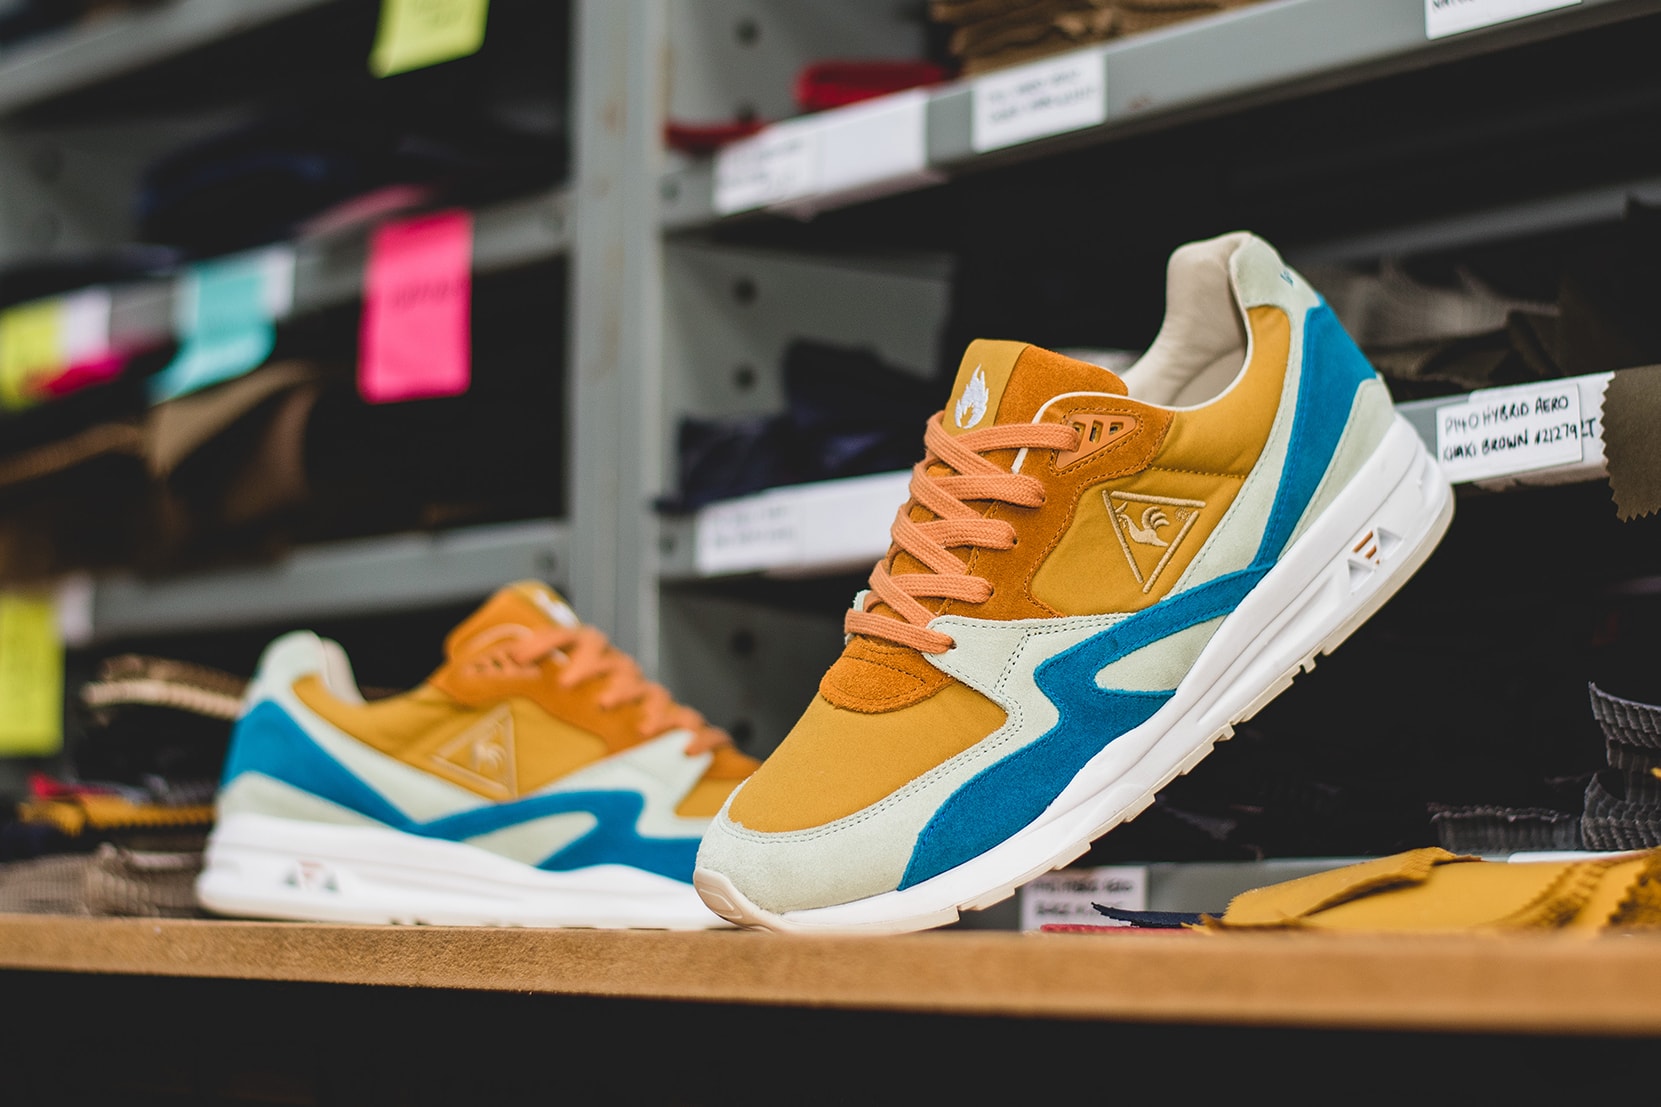 Hanon x Le Coq Sportif LCS R800 Sneaker Collab Collaboration "The Good Agreement" Bon Accord C. F. Stead Halley Stevensons Suede Sneakers Kicks Trainers Shoes Available Buy Cop Purchase Now